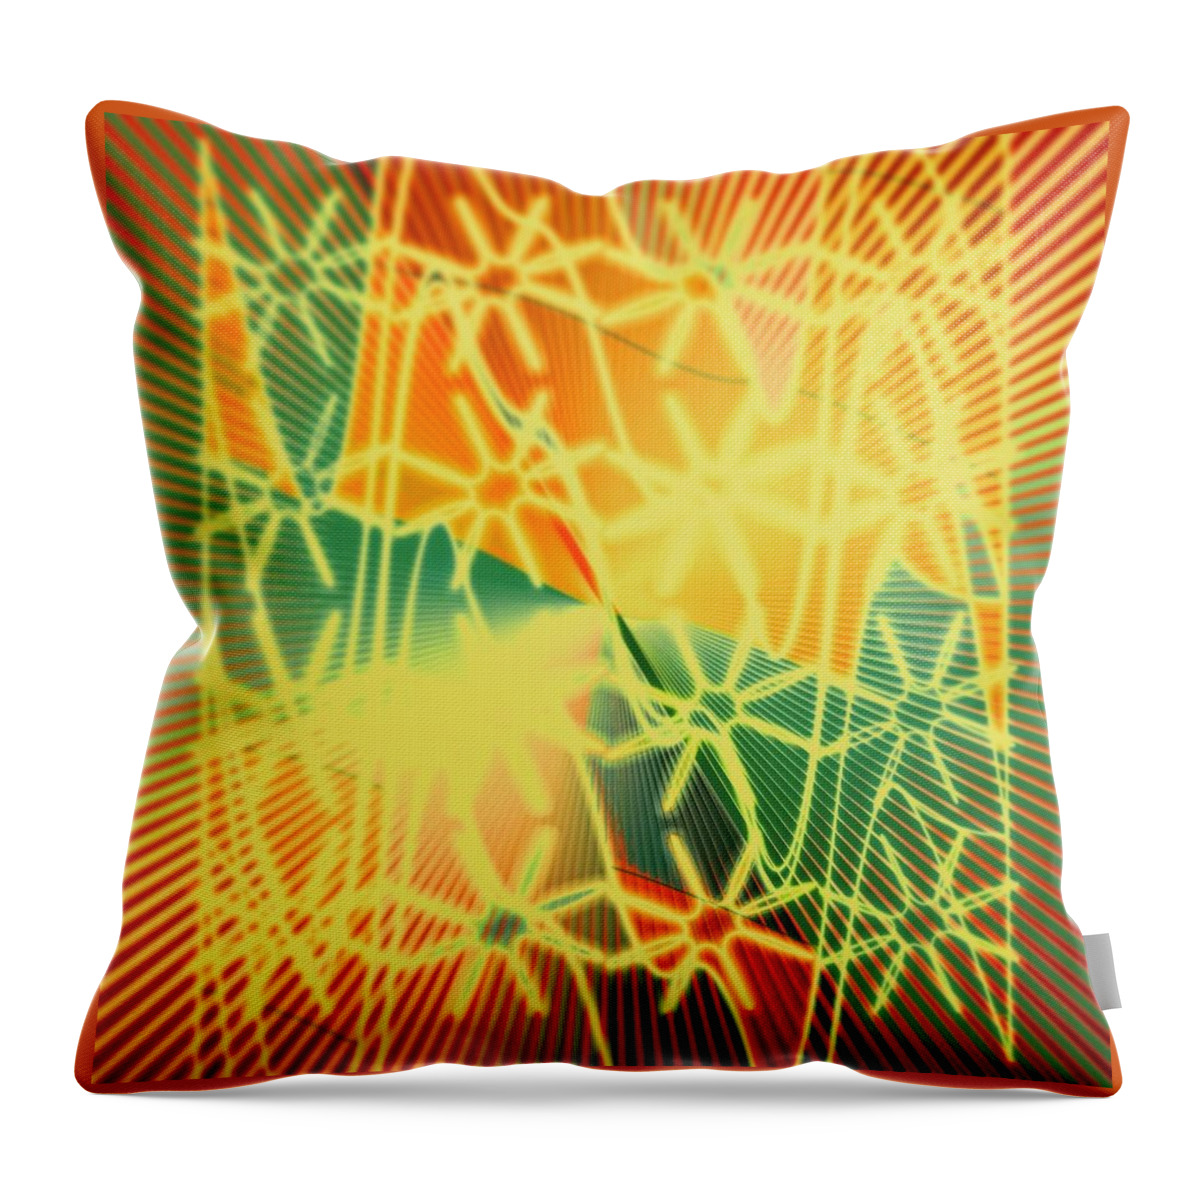 Abstract Throw Pillow featuring the digital art Pattern 50 by Marko Sabotin